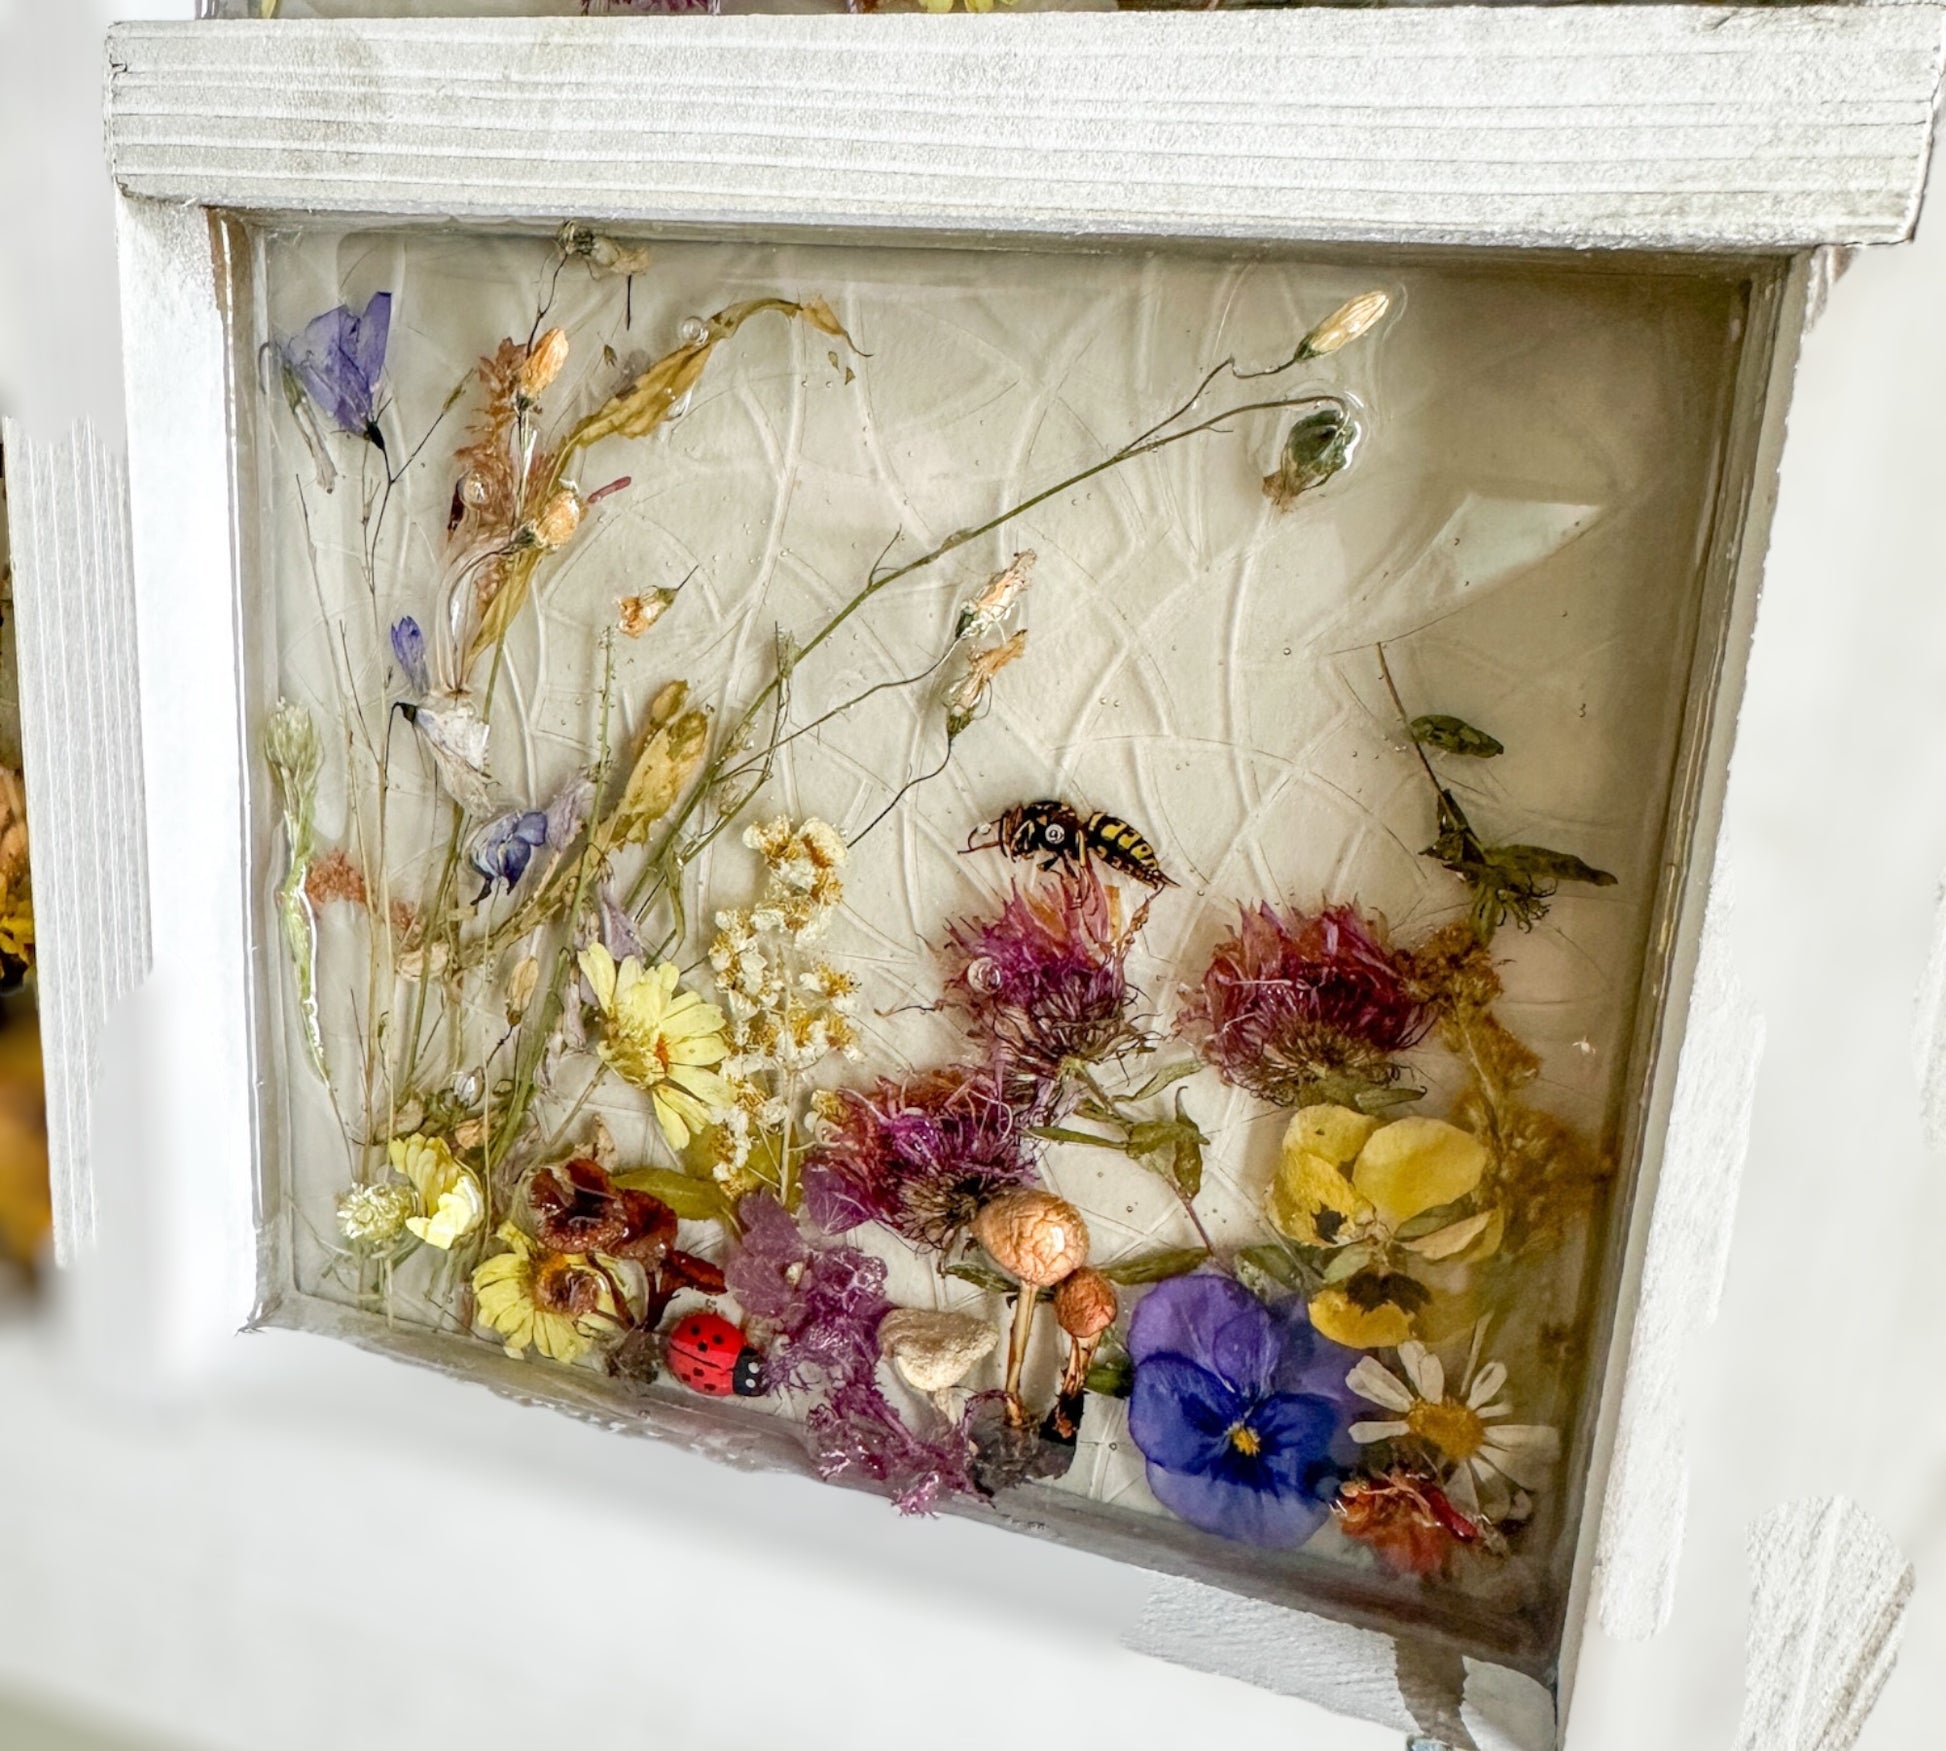 Garden Window Insipired by Nature - Pressed Flower and Botanical Decor